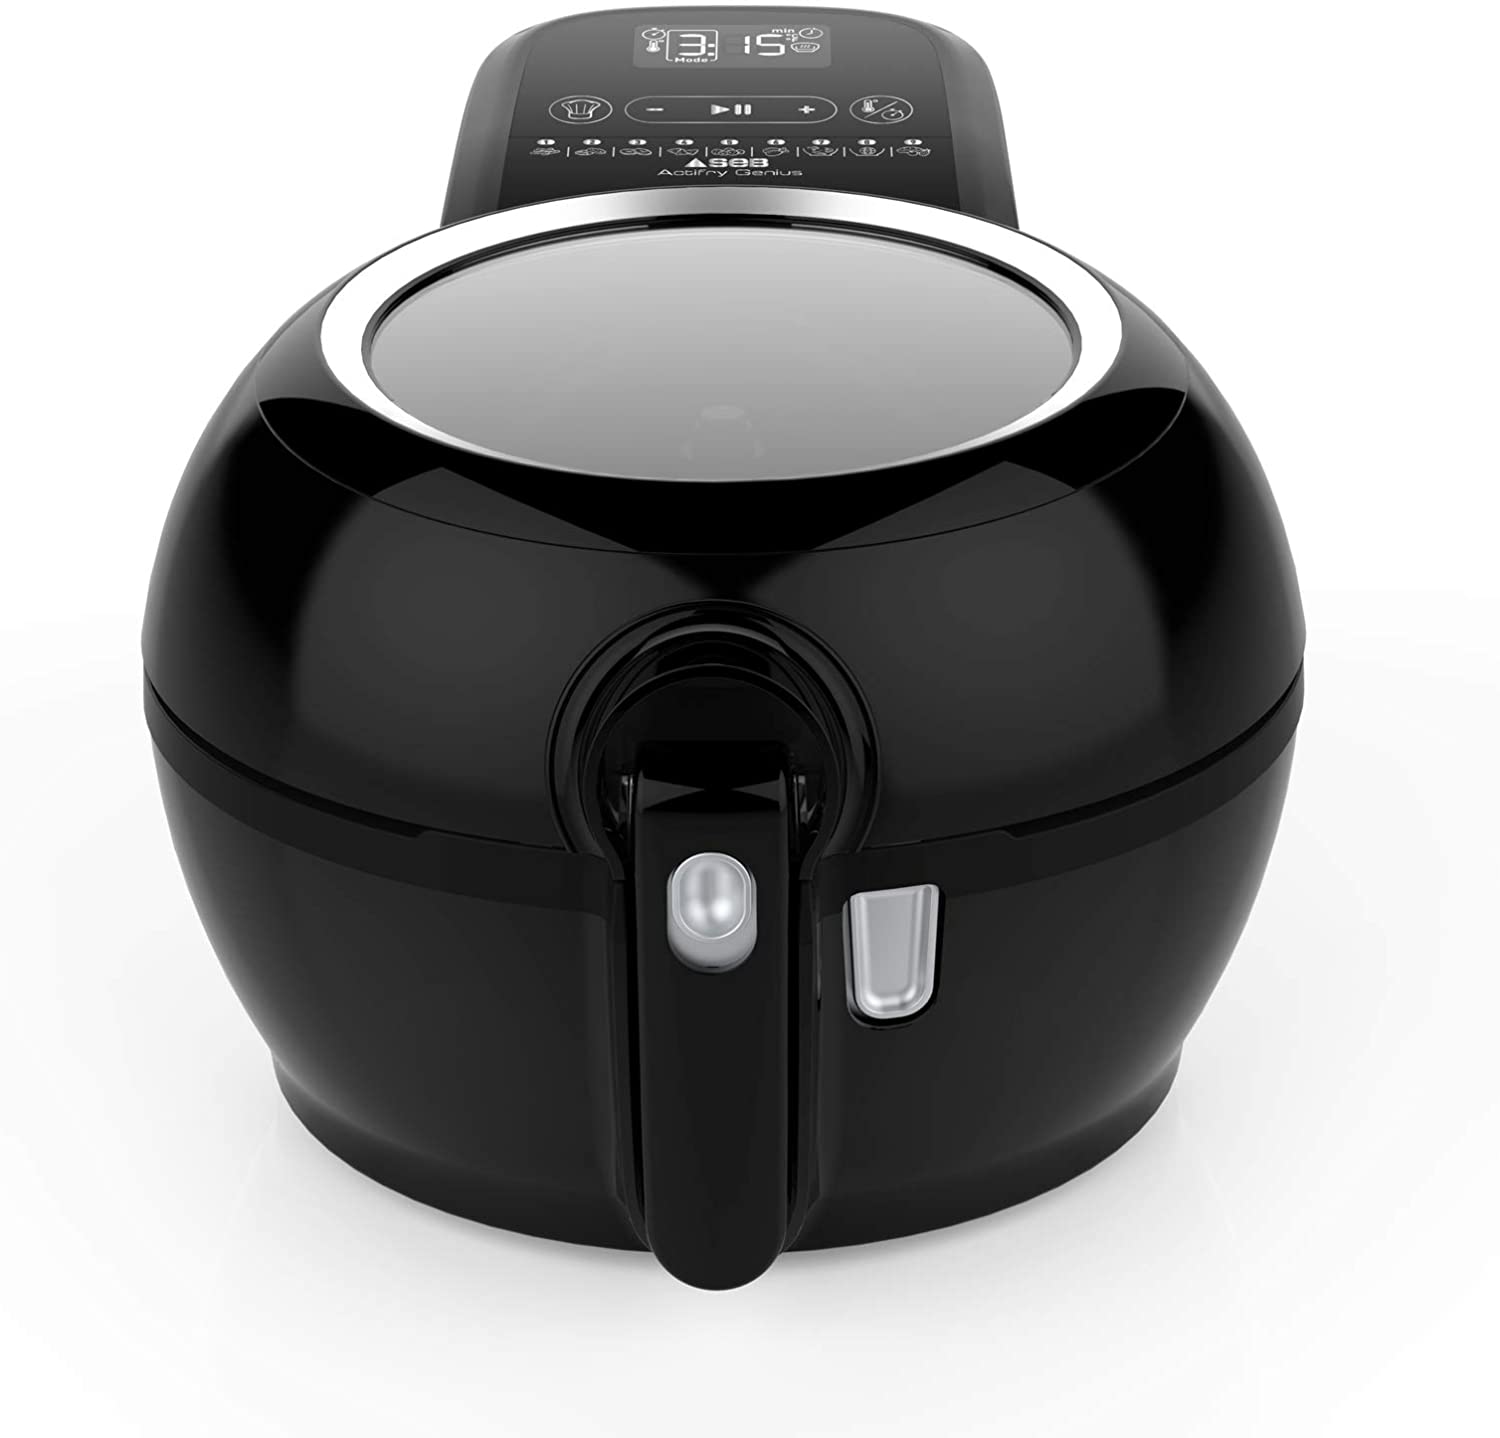 Seb YY3825FB Fryer healthy without oil Actifry genius 1.2 kg 6 persons kitchen - black